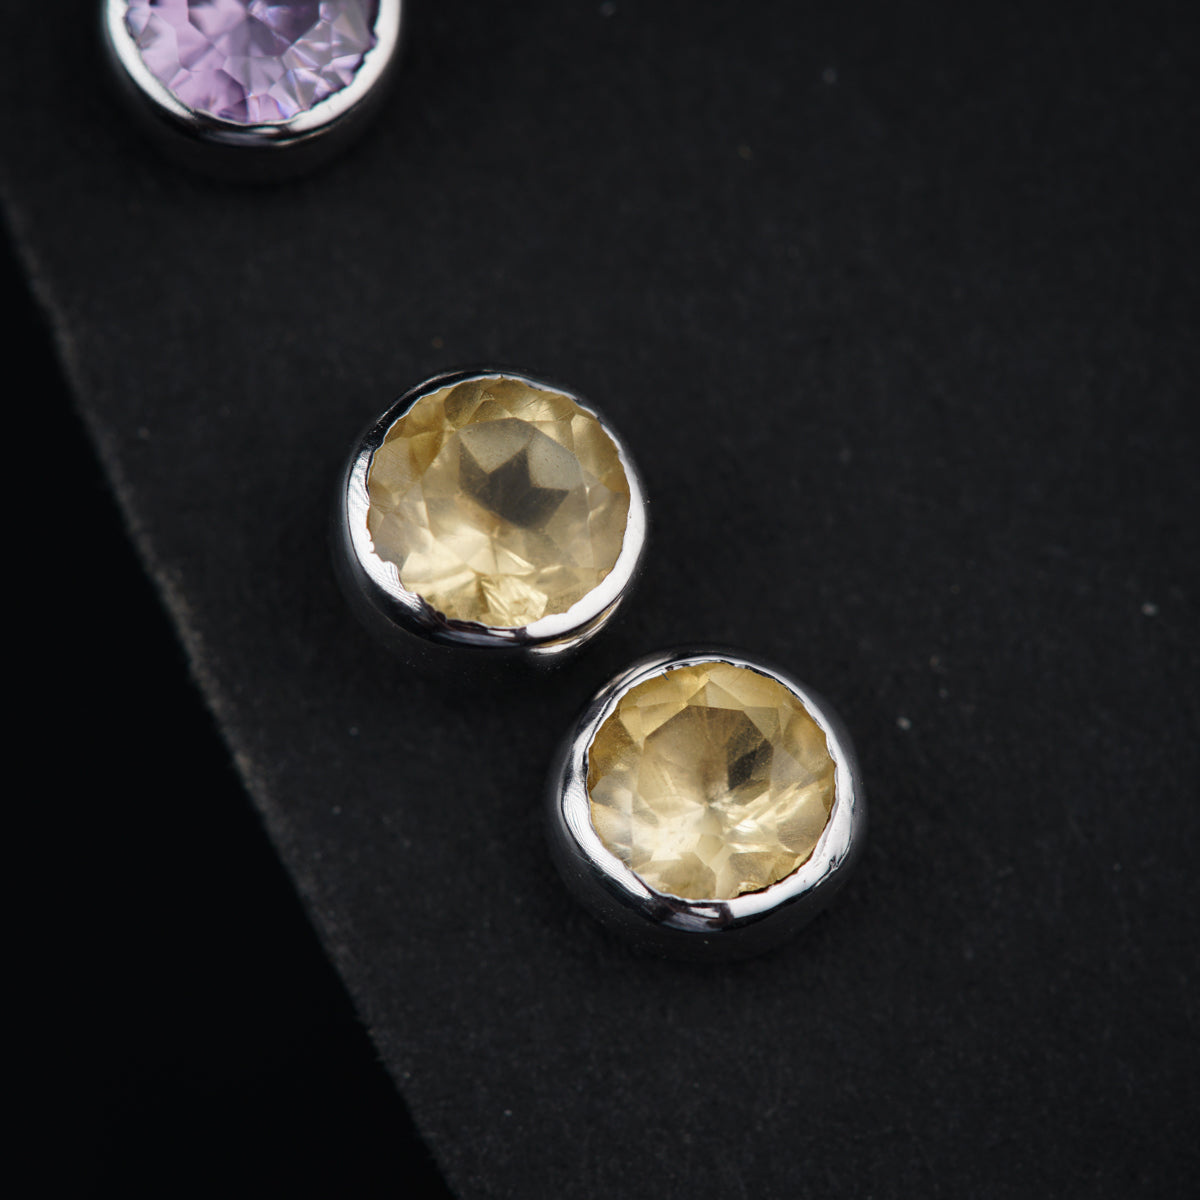 a pair of earrings with a yellow topaz and a purple topaz